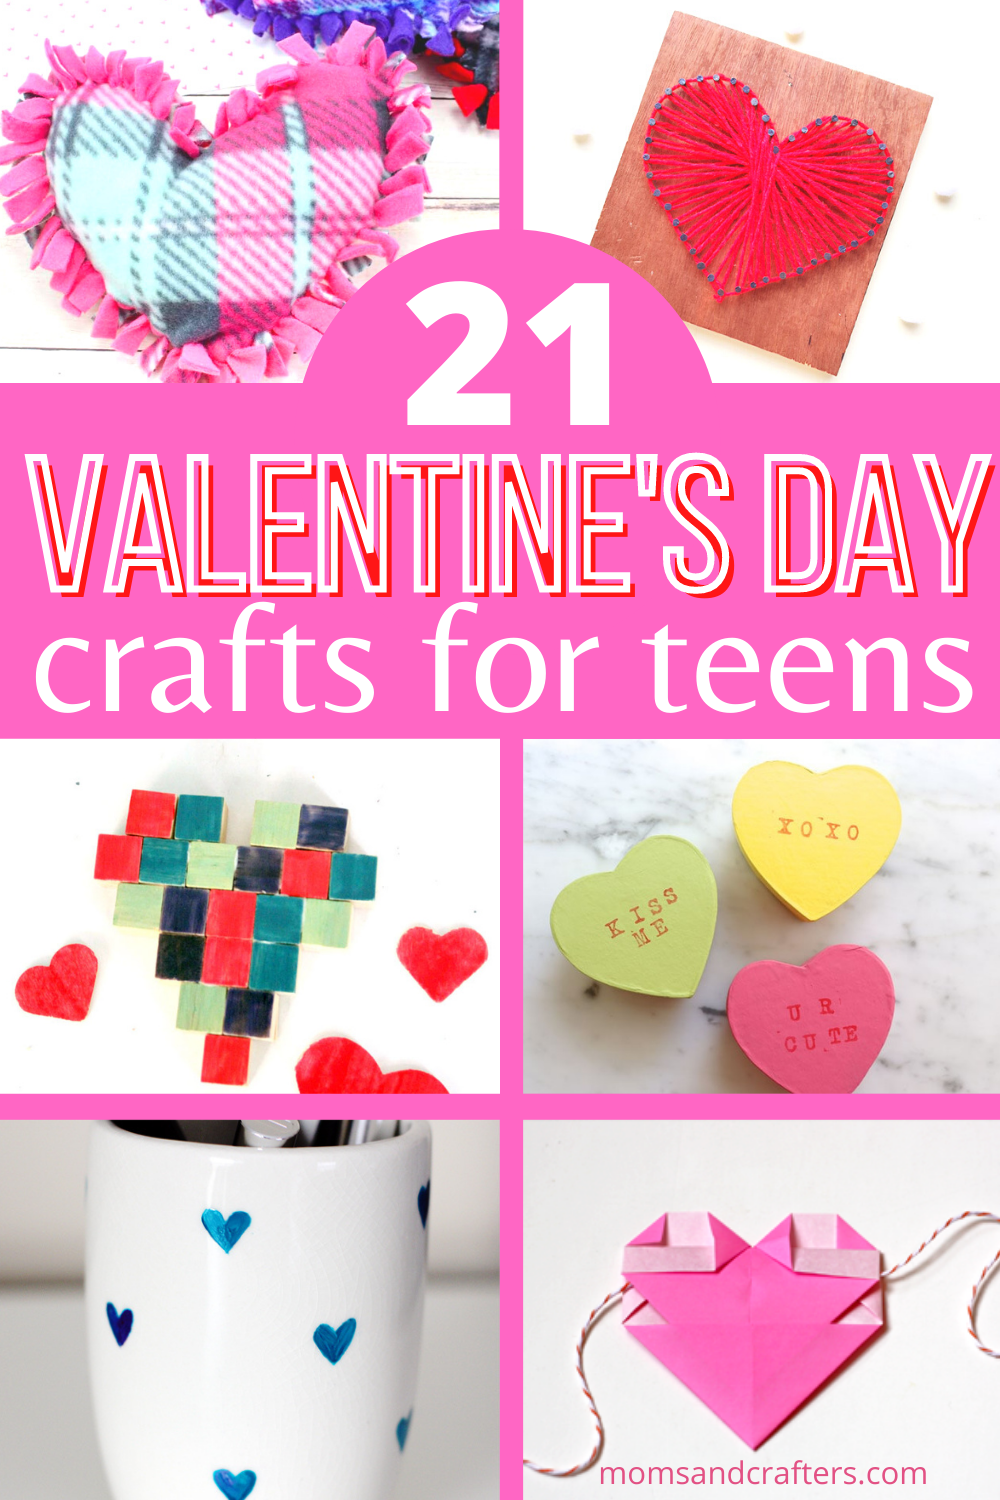 15 Valentine's Crafts for Teens That Are Actually Cool - Raising Teens Today